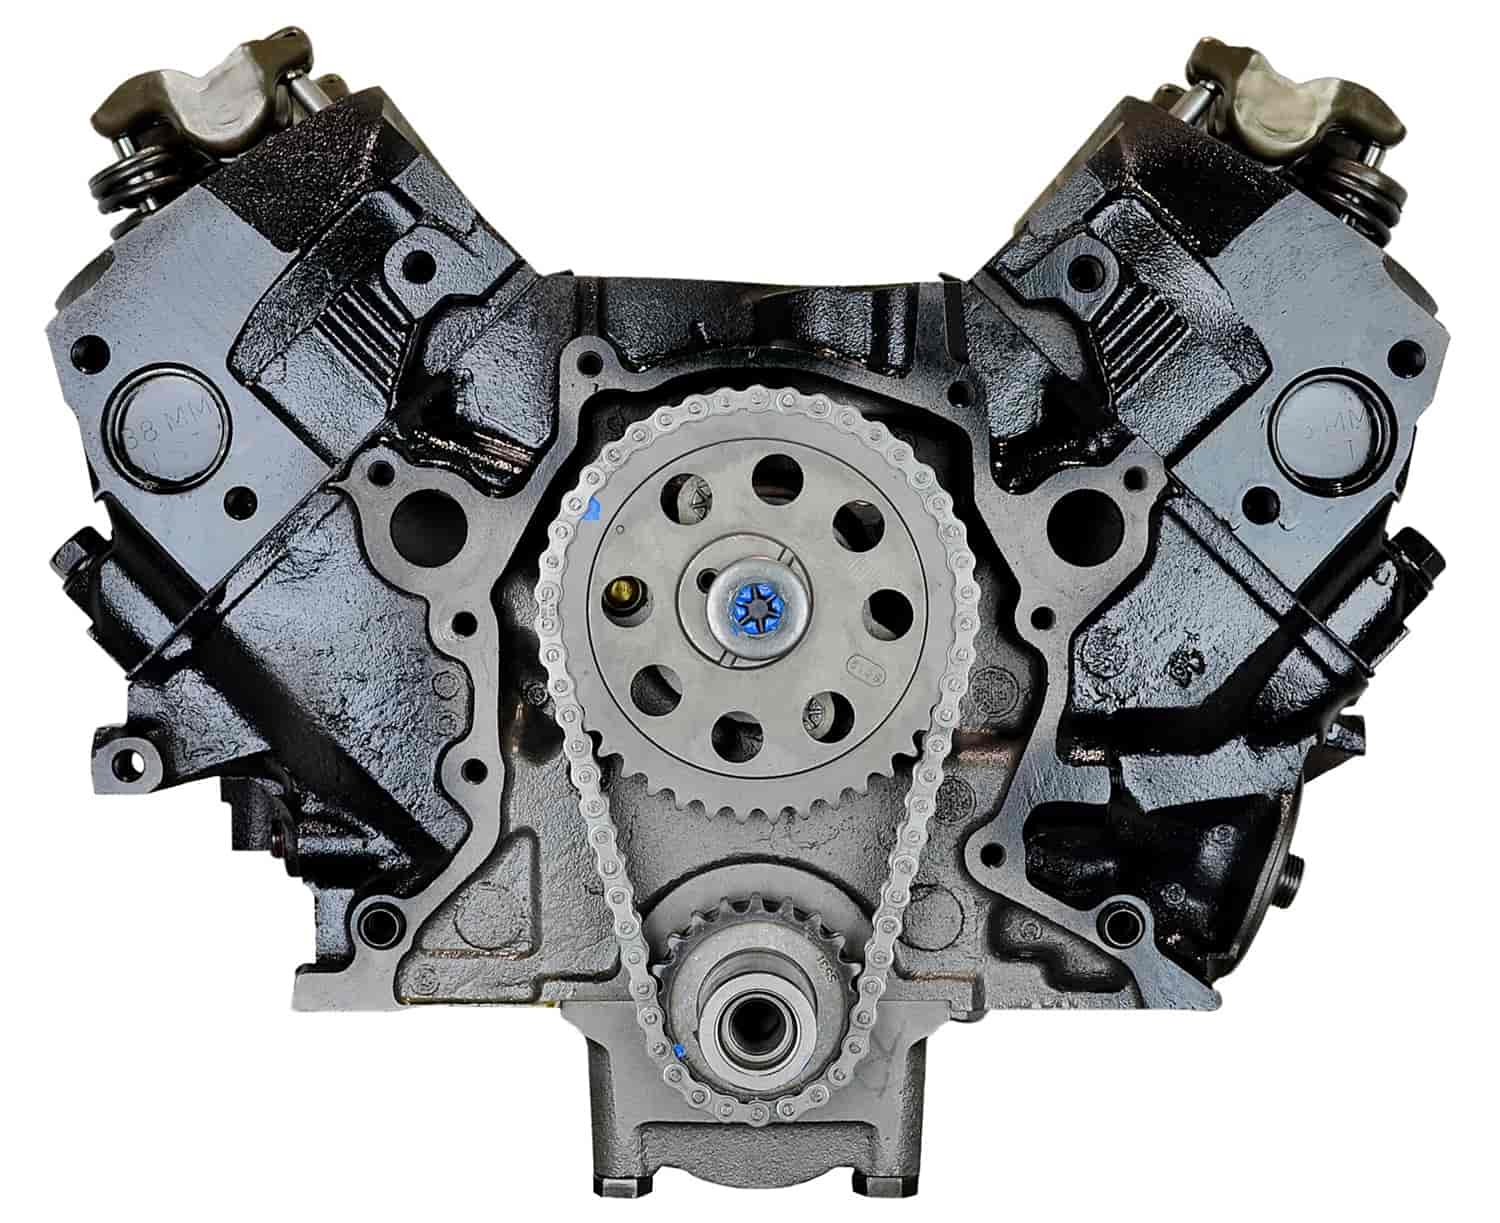 Remanufactured Crate Engine for 1996-1997 Ford Explorer & Mercury Mountaineer with 302ci/5.0L V8